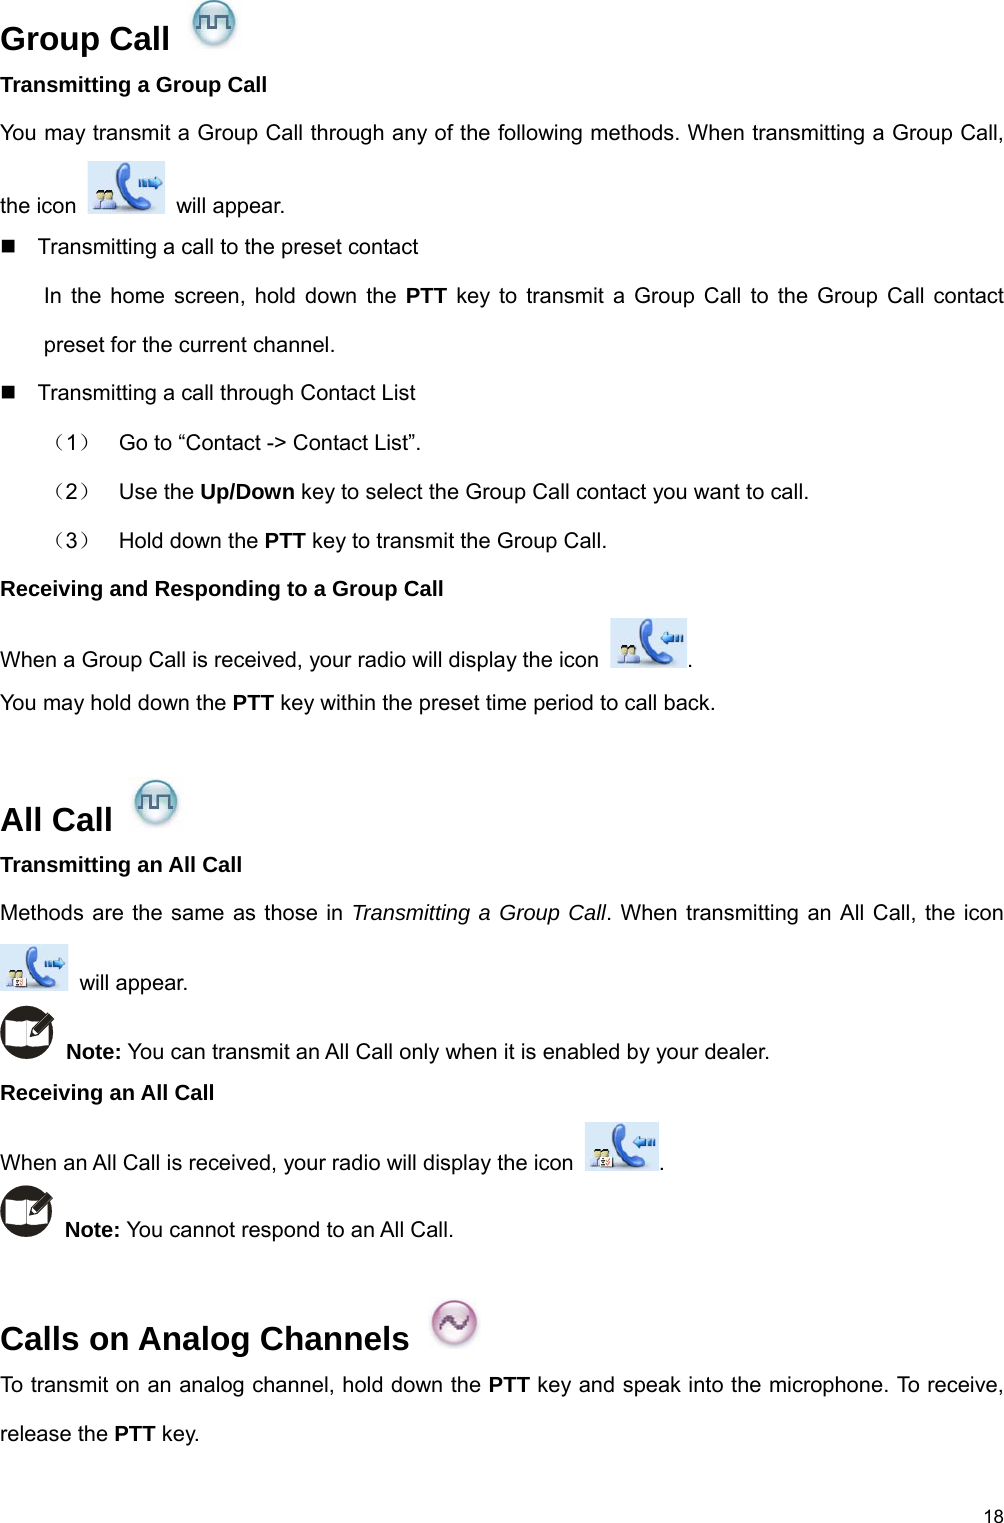 18 Group Call   Transmitting a Group Call You may transmit a Group Call through any of the following methods. When transmitting a Group Call, the icon   will appear.   Transmitting a call to the preset contact In the home screen, hold down the PTT key to transmit a Group Call to the Group Call contact preset for the current channel.     Transmitting a call through Contact List （1）  Go to “Contact -&gt; Contact List”.   （2）  Use the Up/Down key to select the Group Call contact you want to call. （3）  Hold down the PTT key to transmit the Group Call.   Receiving and Responding to a Group Call When a Group Call is received, your radio will display the icon  .  You may hold down the PTT key within the preset time period to call back.    All Call   Transmitting an All Call Methods are the same as those in Transmitting a Group Call. When transmitting an All Call, the icon  will appear.  Note: You can transmit an All Call only when it is enabled by your dealer. Receiving an All Call When an All Call is received, your radio will display the icon  .   Note: You cannot respond to an All Call.    Calls on Analog Channels   To transmit on an analog channel, hold down the PTT key and speak into the microphone. To receive, release the PTT key. 